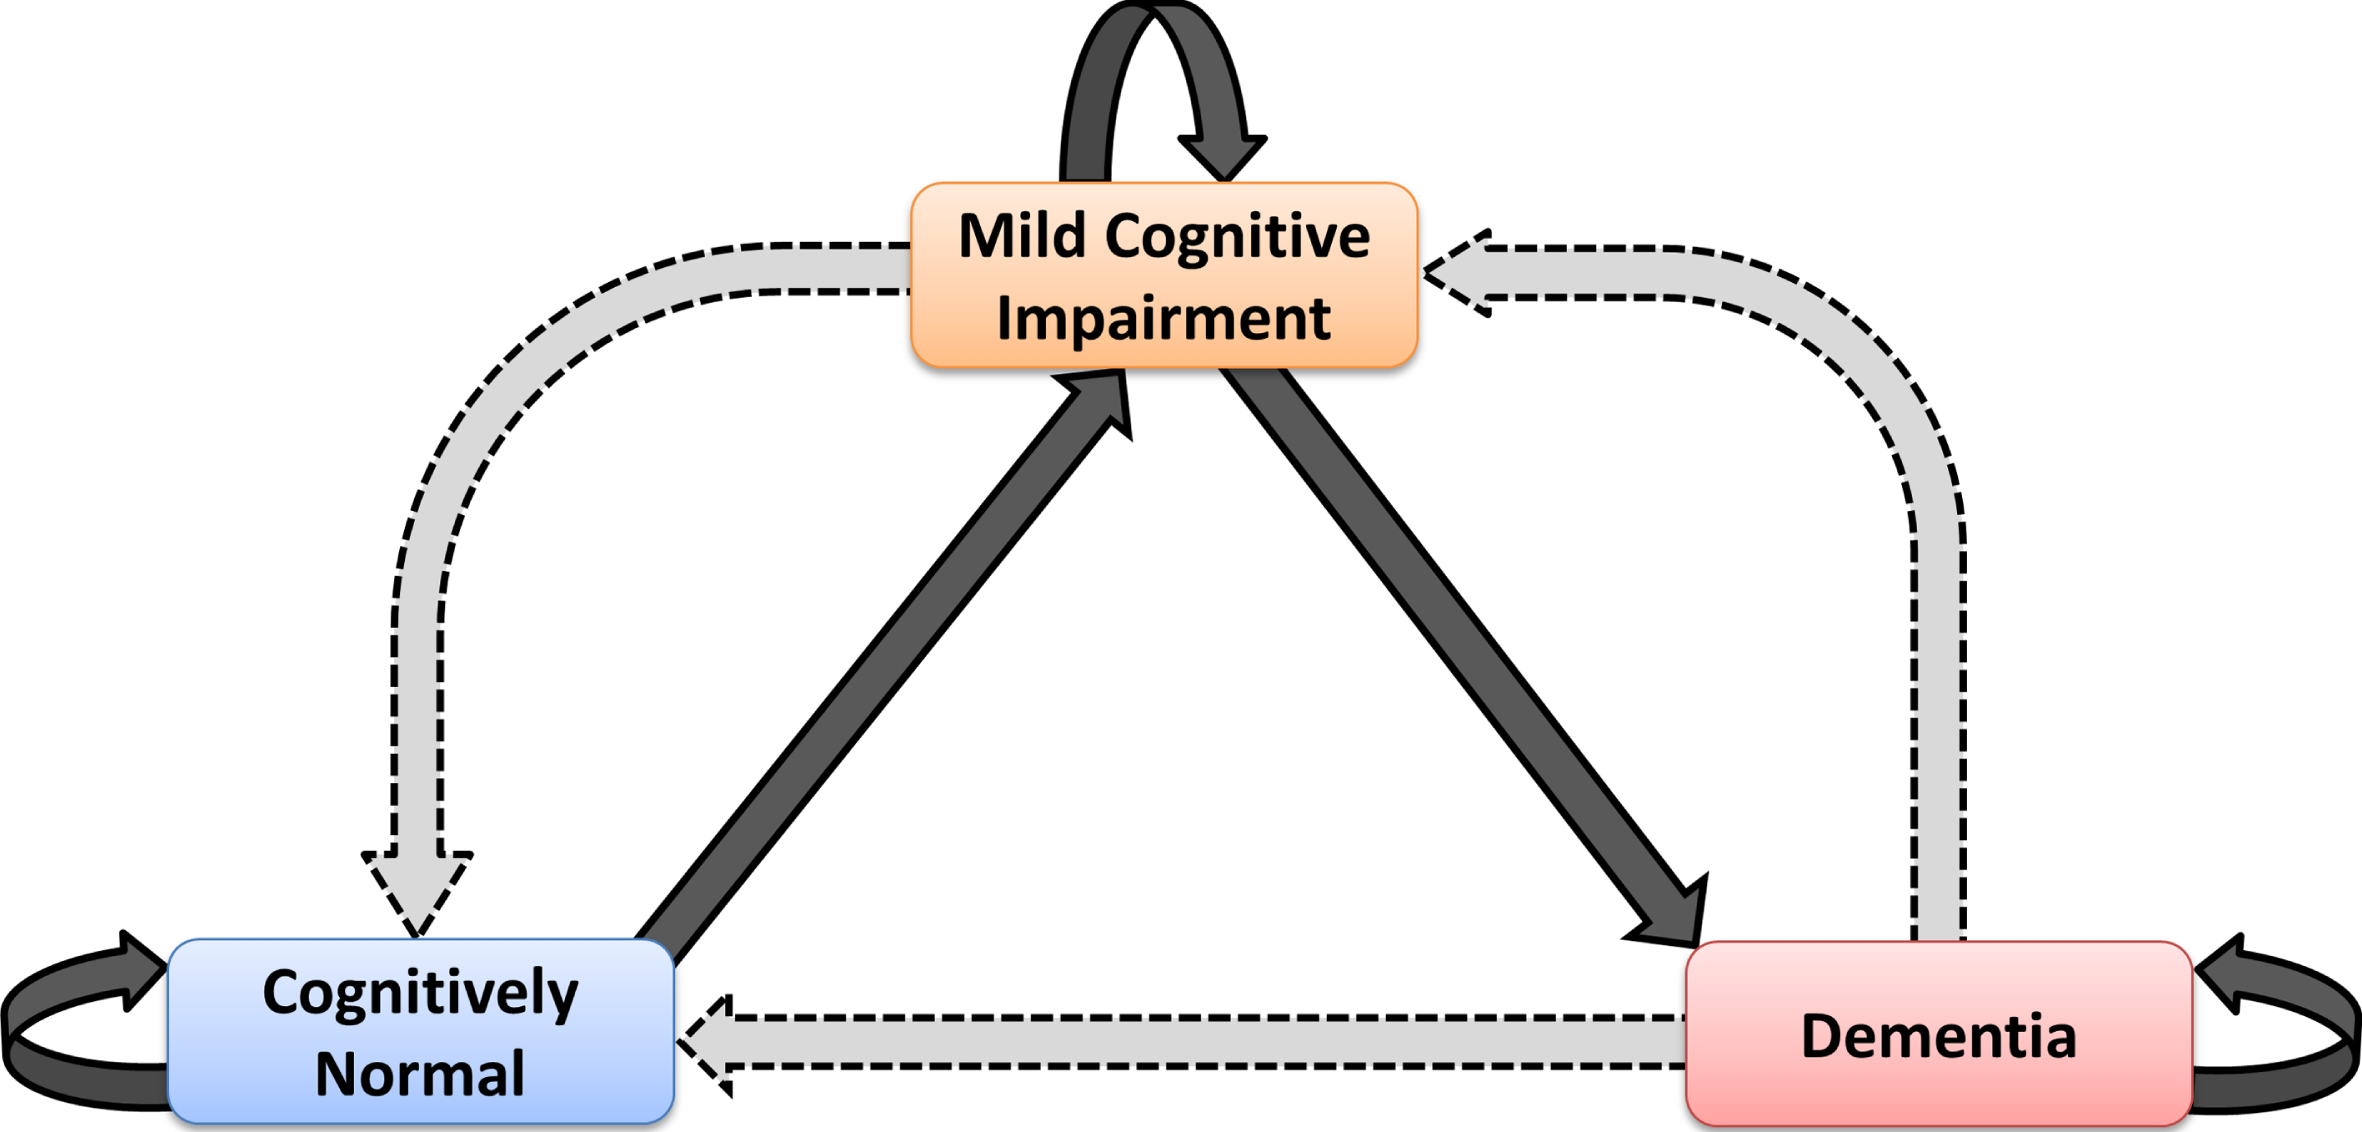 Schematic diagram showing the possible health and disease states in which one individual can be classified in the present study and potential transitions between these states. Observable back-transitions of individuals from Mild Cognitive Impairment to Cognitively Normal state, and from Dementia to Mild Cognitive Impairment and Cognitively Normal states are questionable; they might be real, or just due to different factors that can affect the accuracy of the diagnosis.